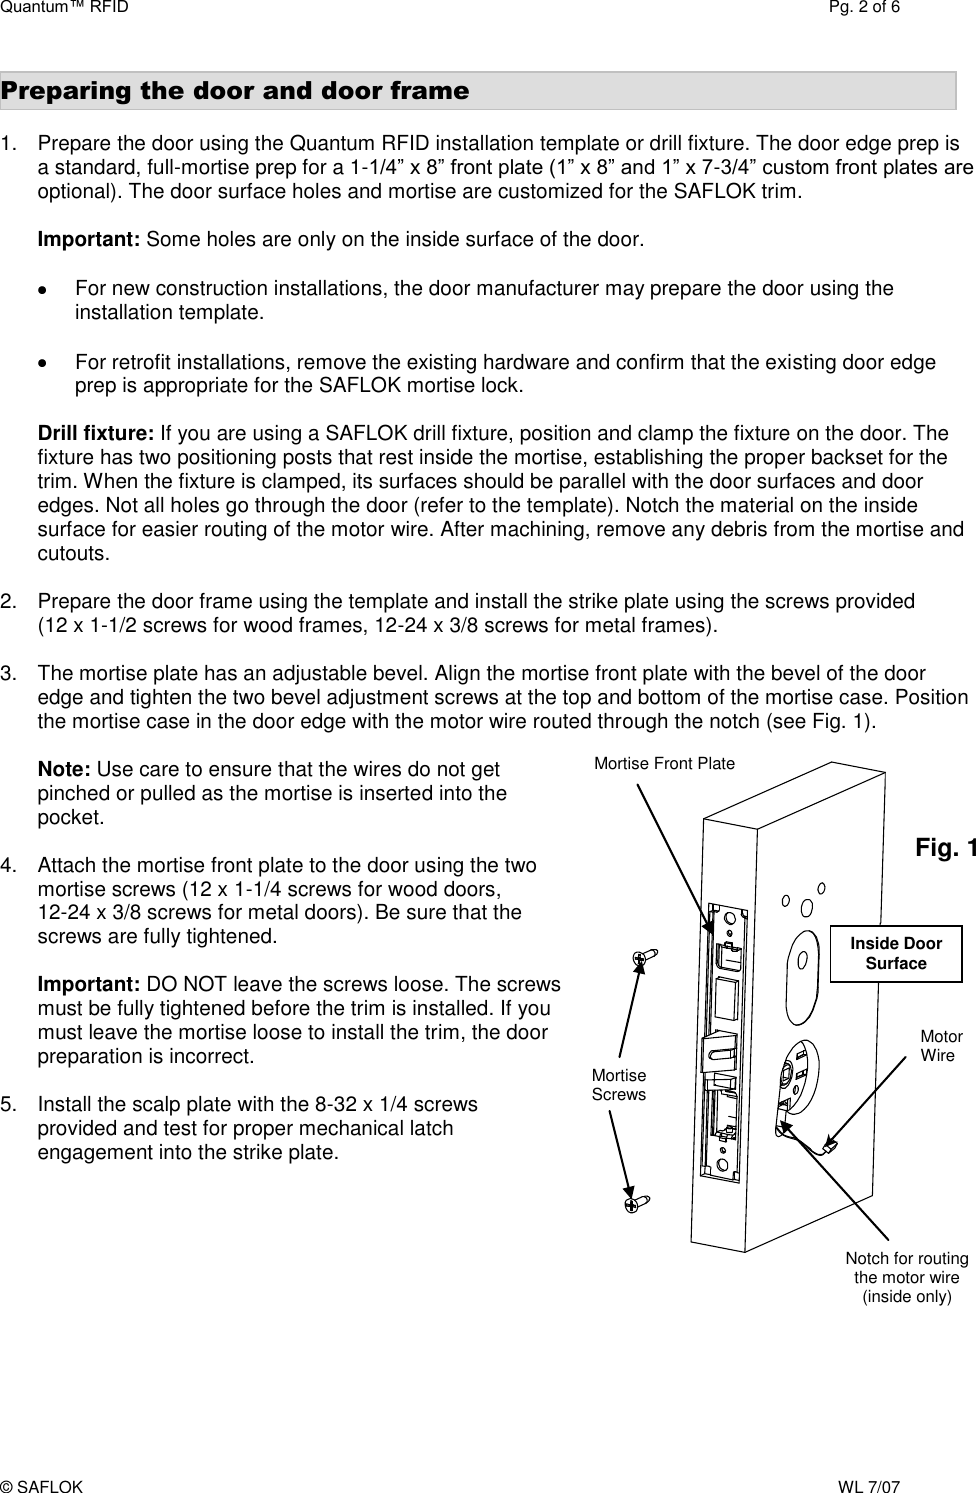 Quantum™ RFID  Pg. 2 of 6 © SAFLOK    WL 7/07                     Mortise Screws  Motor Wire  Fig. 1 Preparing the door and door frame  1.  Prepare the door using the Quantum RFID installation template or drill fixture. The door edge prep is a standard, full-mortise prep for a 1-1/4” x 8” front plate (1” x 8” and 1” x 7-3/4” custom front plates are optional). The door surface holes and mortise are customized for the SAFLOK trim.  Important: Some holes are only on the inside surface of the door.    For new construction installations, the door manufacturer may prepare the door using the installation template.    For retrofit installations, remove the existing hardware and confirm that the existing door edge prep is appropriate for the SAFLOK mortise lock.   Drill fixture: If you are using a SAFLOK drill fixture, position and clamp the fixture on the door. The fixture has two positioning posts that rest inside the mortise, establishing the proper backset for the trim. When the fixture is clamped, its surfaces should be parallel with the door surfaces and door edges. Not all holes go through the door (refer to the template). Notch the material on the inside surface for easier routing of the motor wire. After machining, remove any debris from the mortise and cutouts.  2.  Prepare the door frame using the template and install the strike plate using the screws provided   (12 x 1-1/2 screws for wood frames, 12-24 x 3/8 screws for metal frames).  3.  The mortise plate has an adjustable bevel. Align the mortise front plate with the bevel of the door edge and tighten the two bevel adjustment screws at the top and bottom of the mortise case. Position the mortise case in the door edge with the motor wire routed through the notch (see Fig. 1).   Note: Use care to ensure that the wires do not get  pinched or pulled as the mortise is inserted into the pocket.   4.  Attach the mortise front plate to the door using the two mortise screws (12 x 1-1/4 screws for wood doors,  12-24 x 3/8 screws for metal doors). Be sure that the screws are fully tightened.   Important: DO NOT leave the screws loose. The screws must be fully tightened before the trim is installed. If you must leave the mortise loose to install the trim, the door preparation is incorrect.   5.  Install the scalp plate with the 8-32 x 1/4 screws provided and test for proper mechanical latch engagement into the strike plate. Mortise Front Plate Notch for routing the motor wire (inside only) Inside Door Surface 